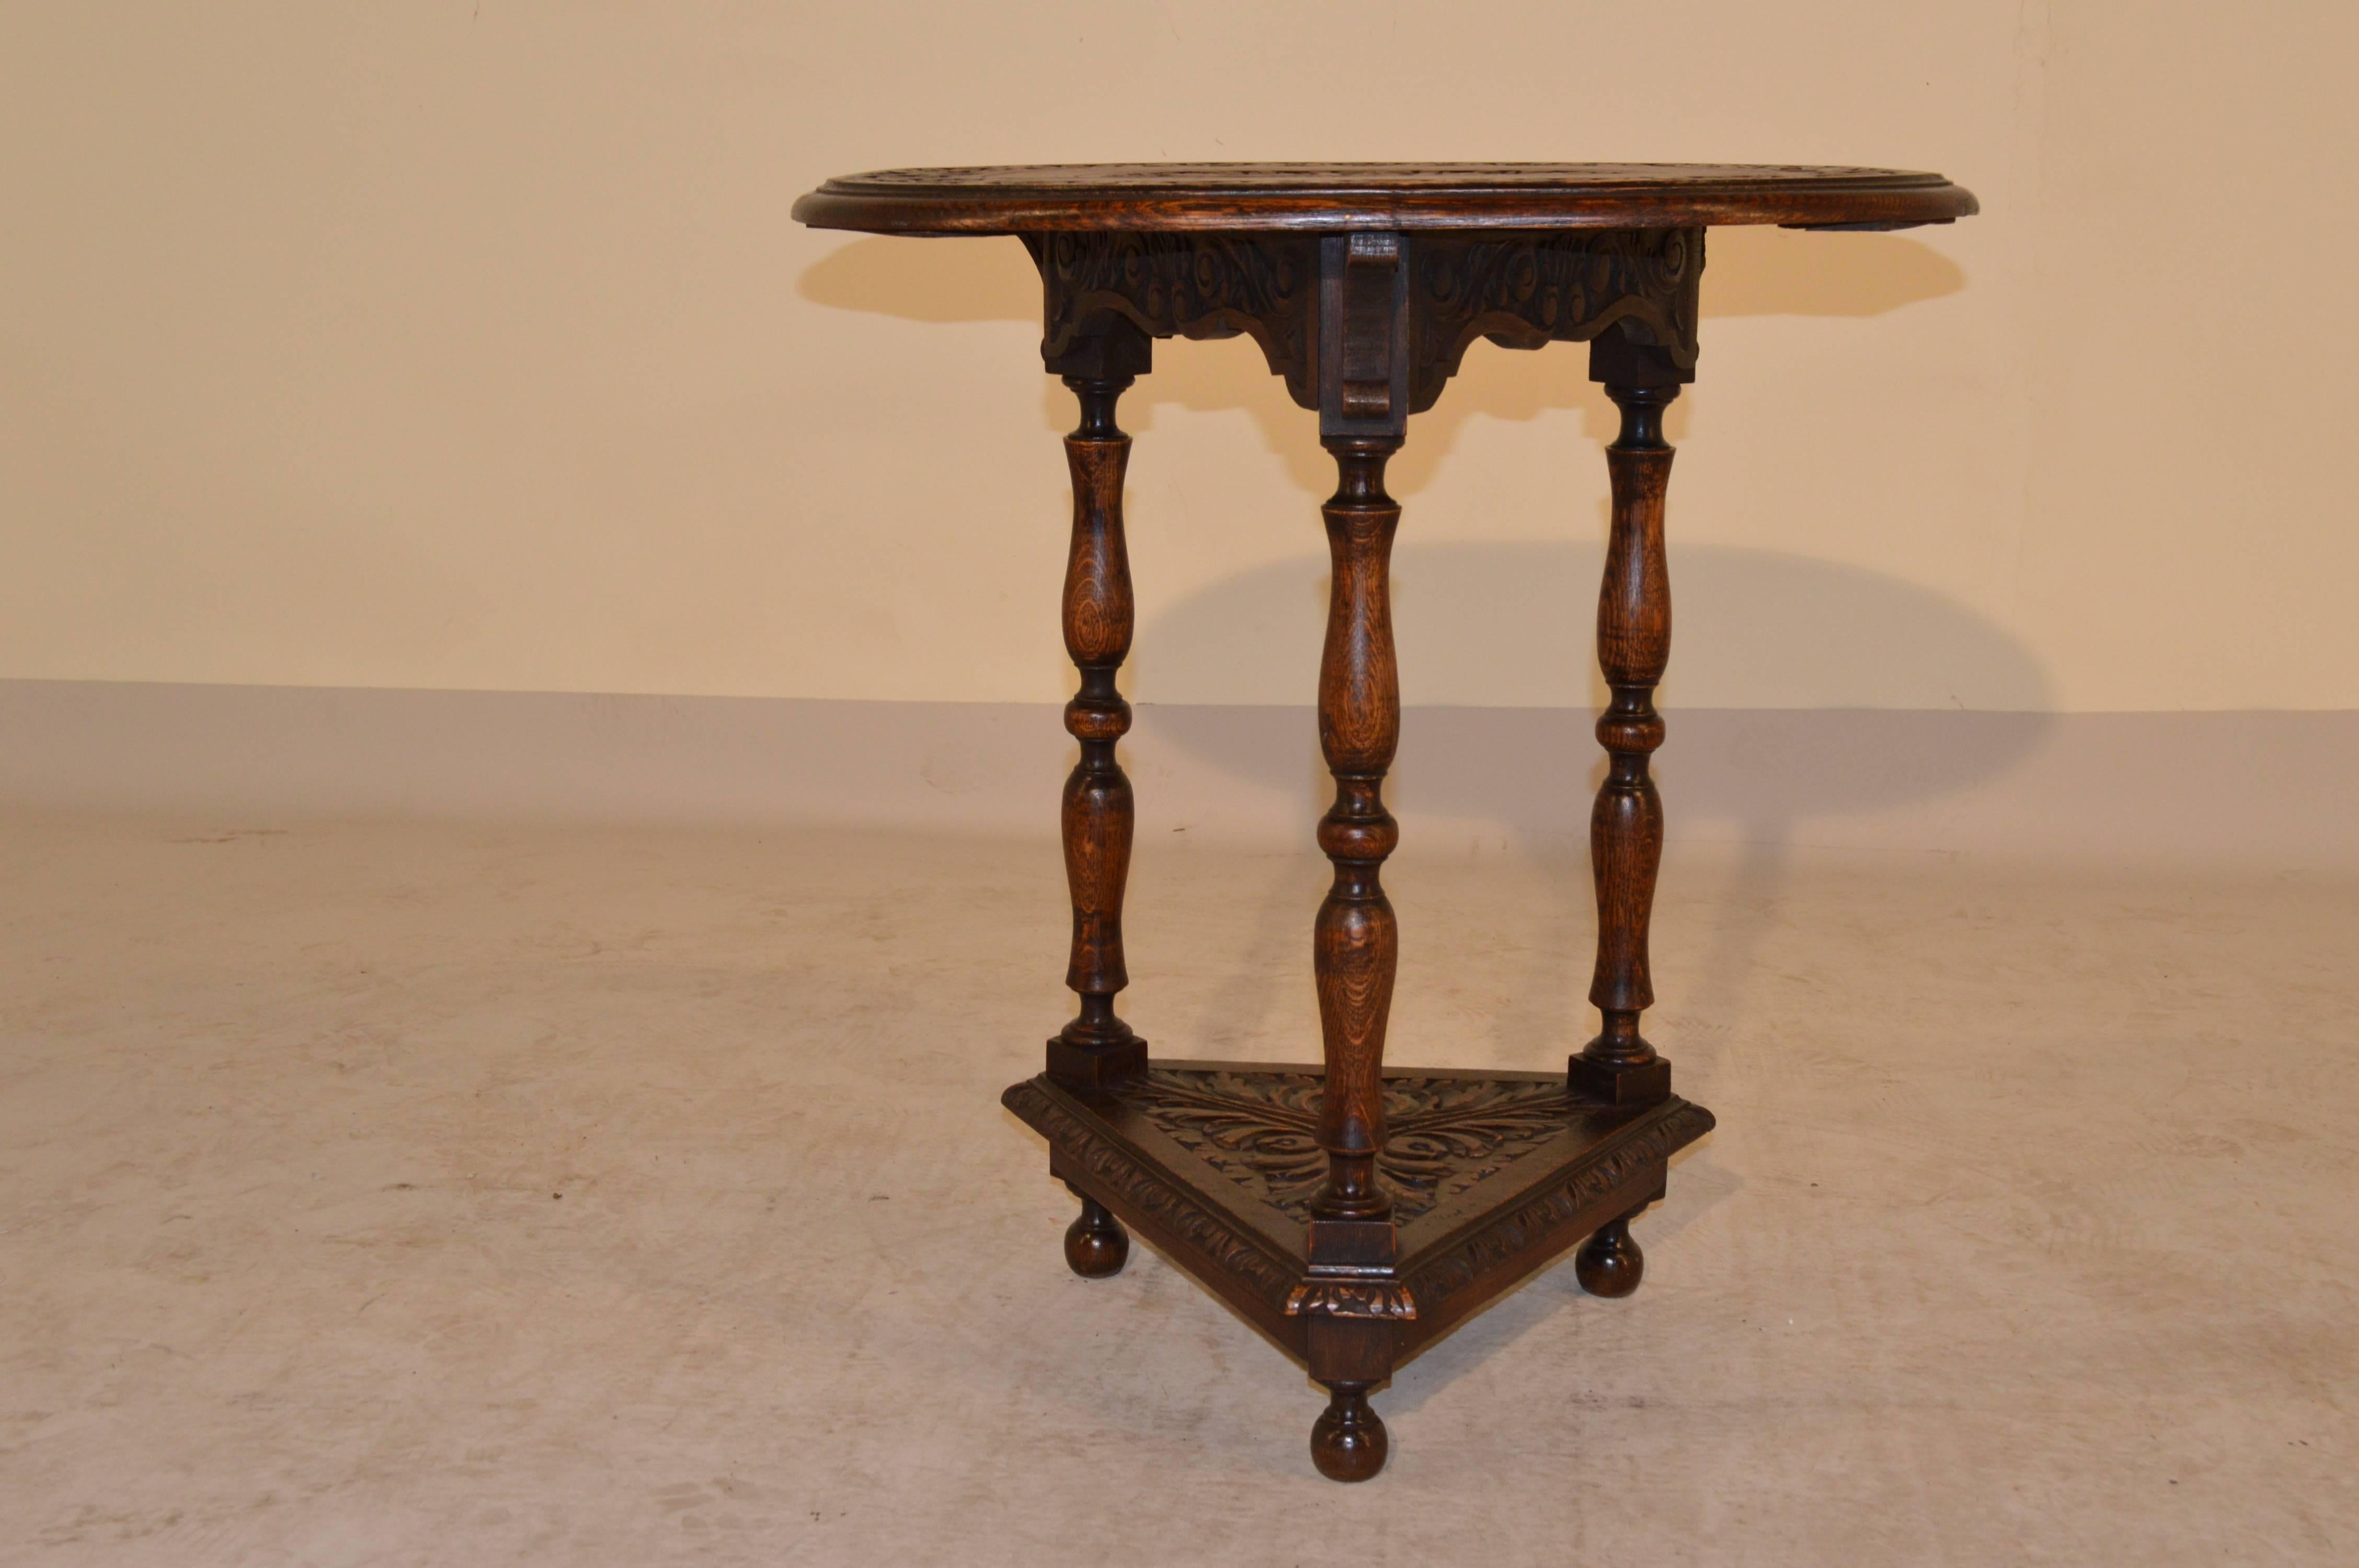 19th Century English oak carved side table with an oval top, which is beveled around the edge and banded with carving, circling a central carved medallion.  The apron is scalloped and carved decorated and follows down to lovely hand turned legs,